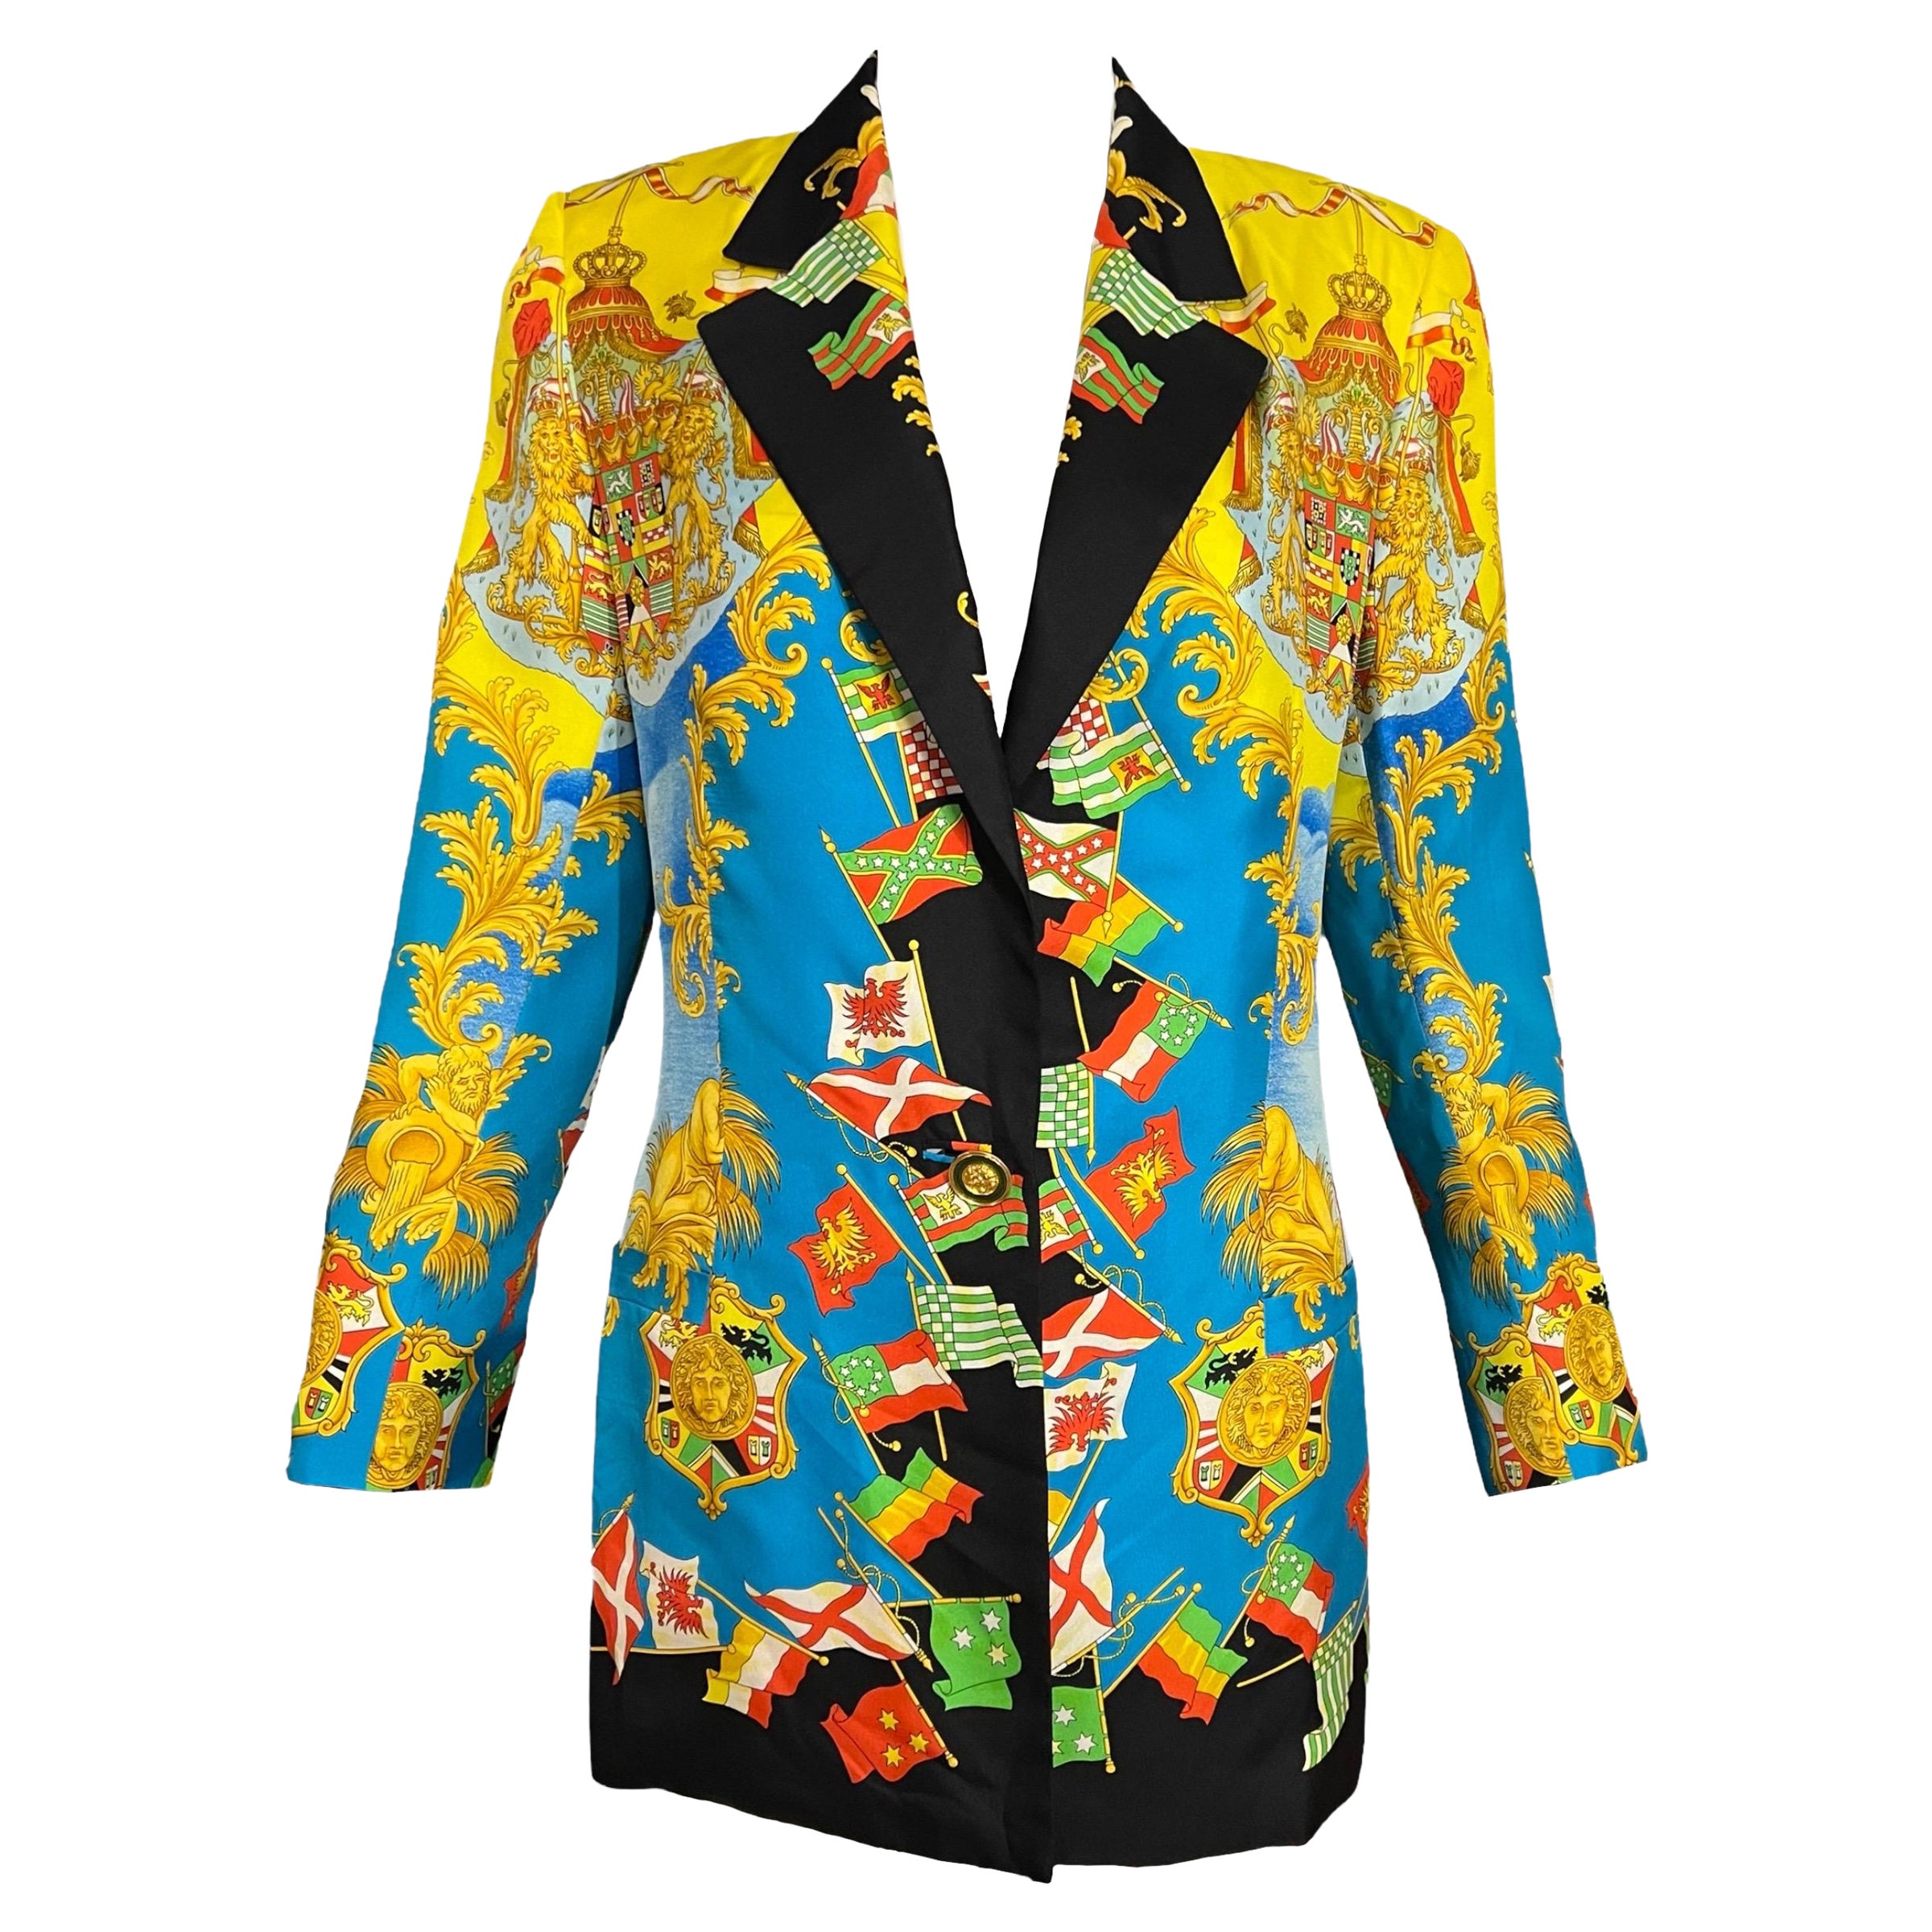 S/S 1993 Gianni Versace Baroque Flags Silk Blazer Jacket Miami Collection  For Sale